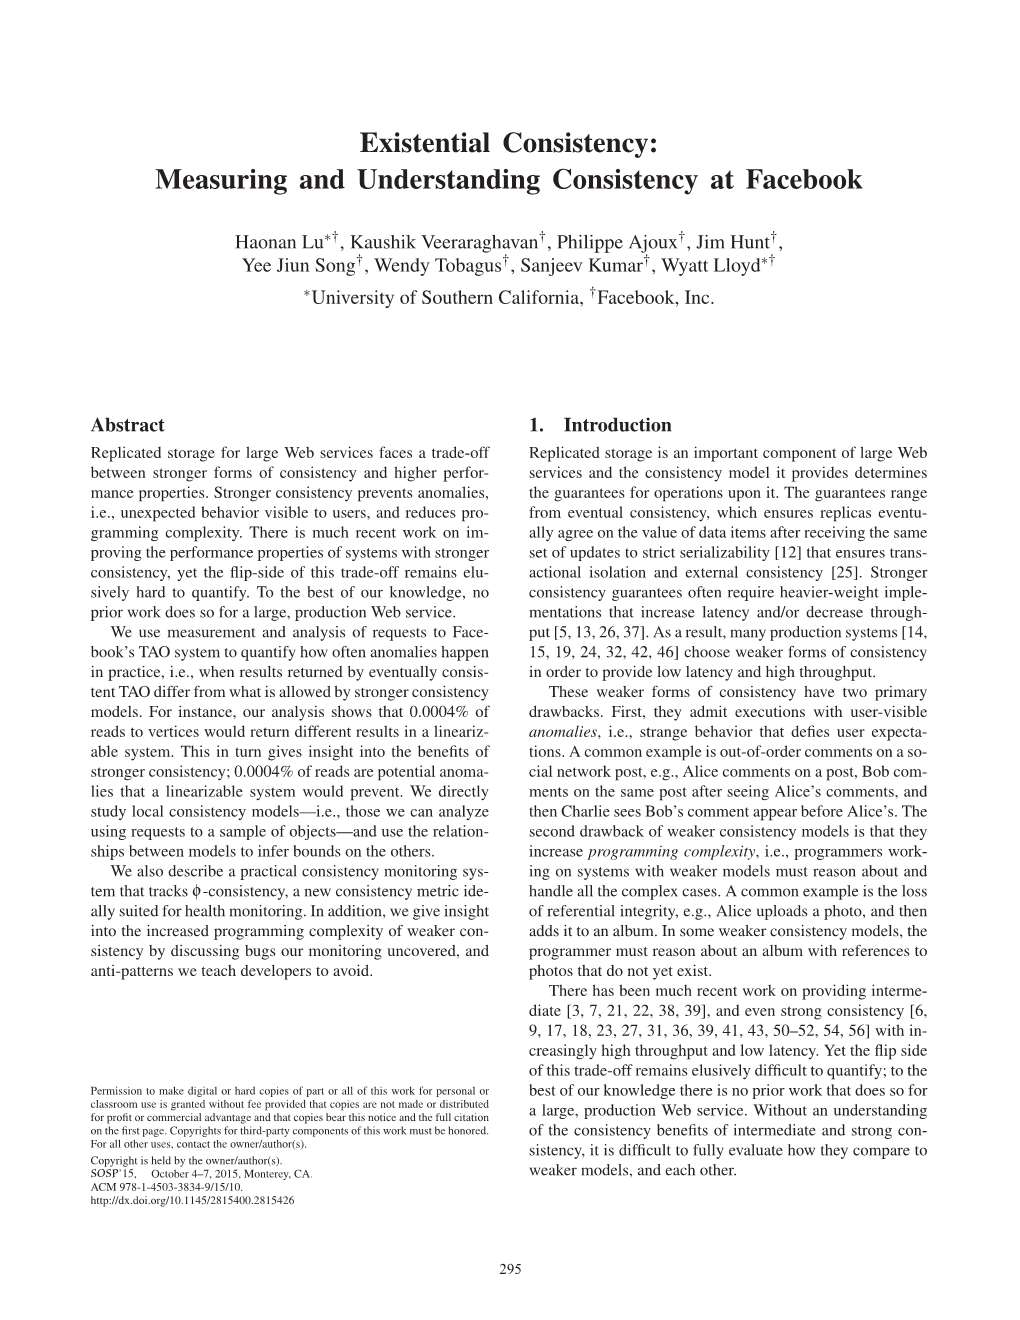 Measuring and Understanding Consistency at Facebook